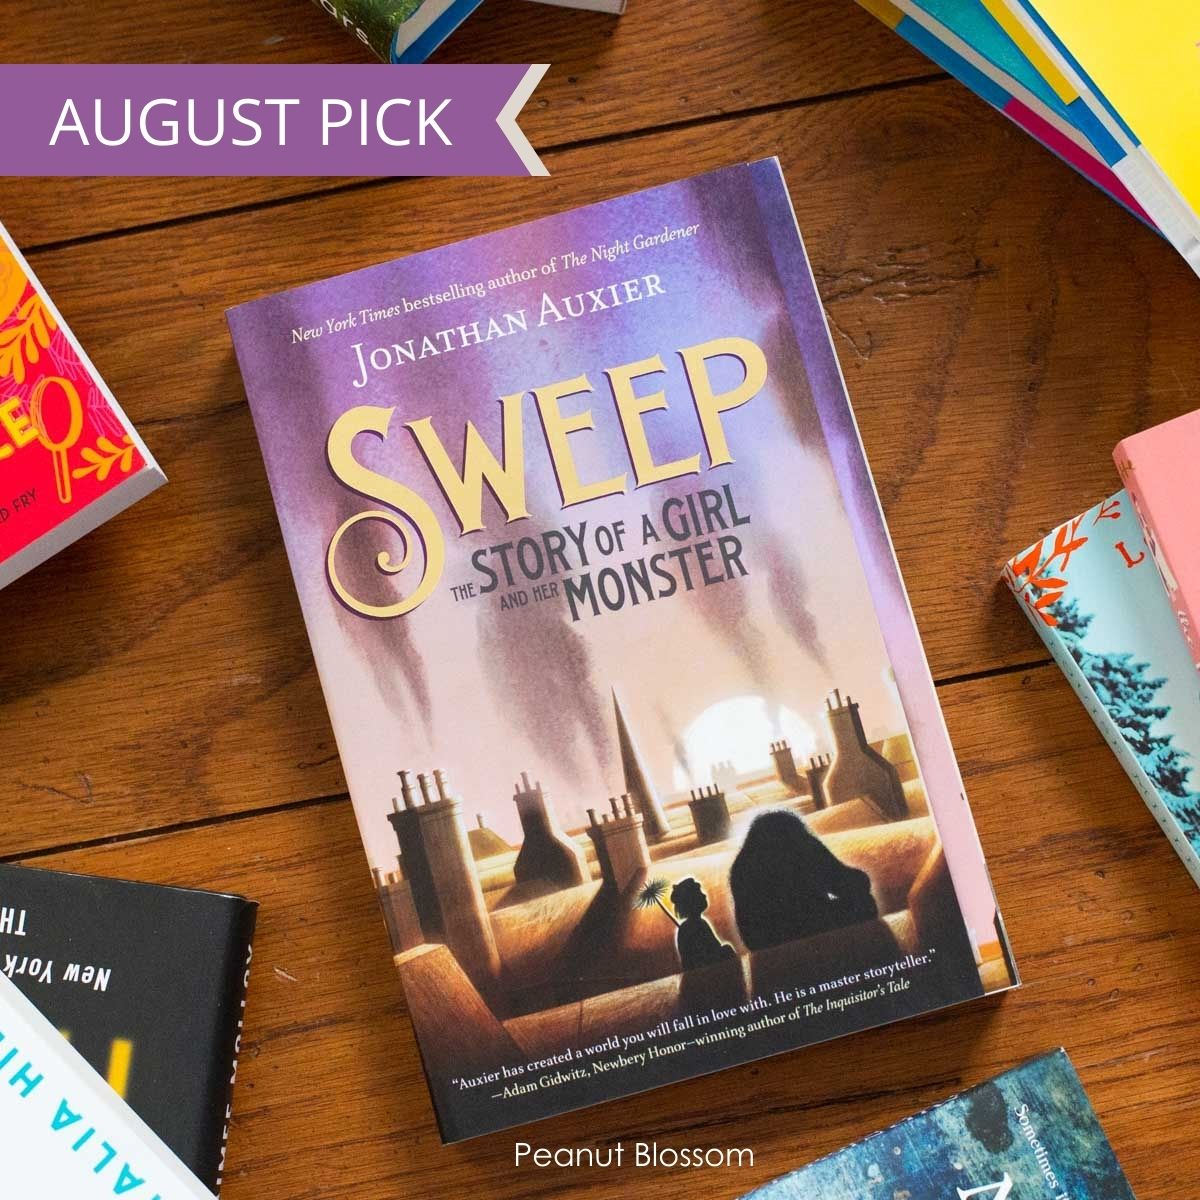 A copy of Sweet by Jonathan Auxier is on the table.